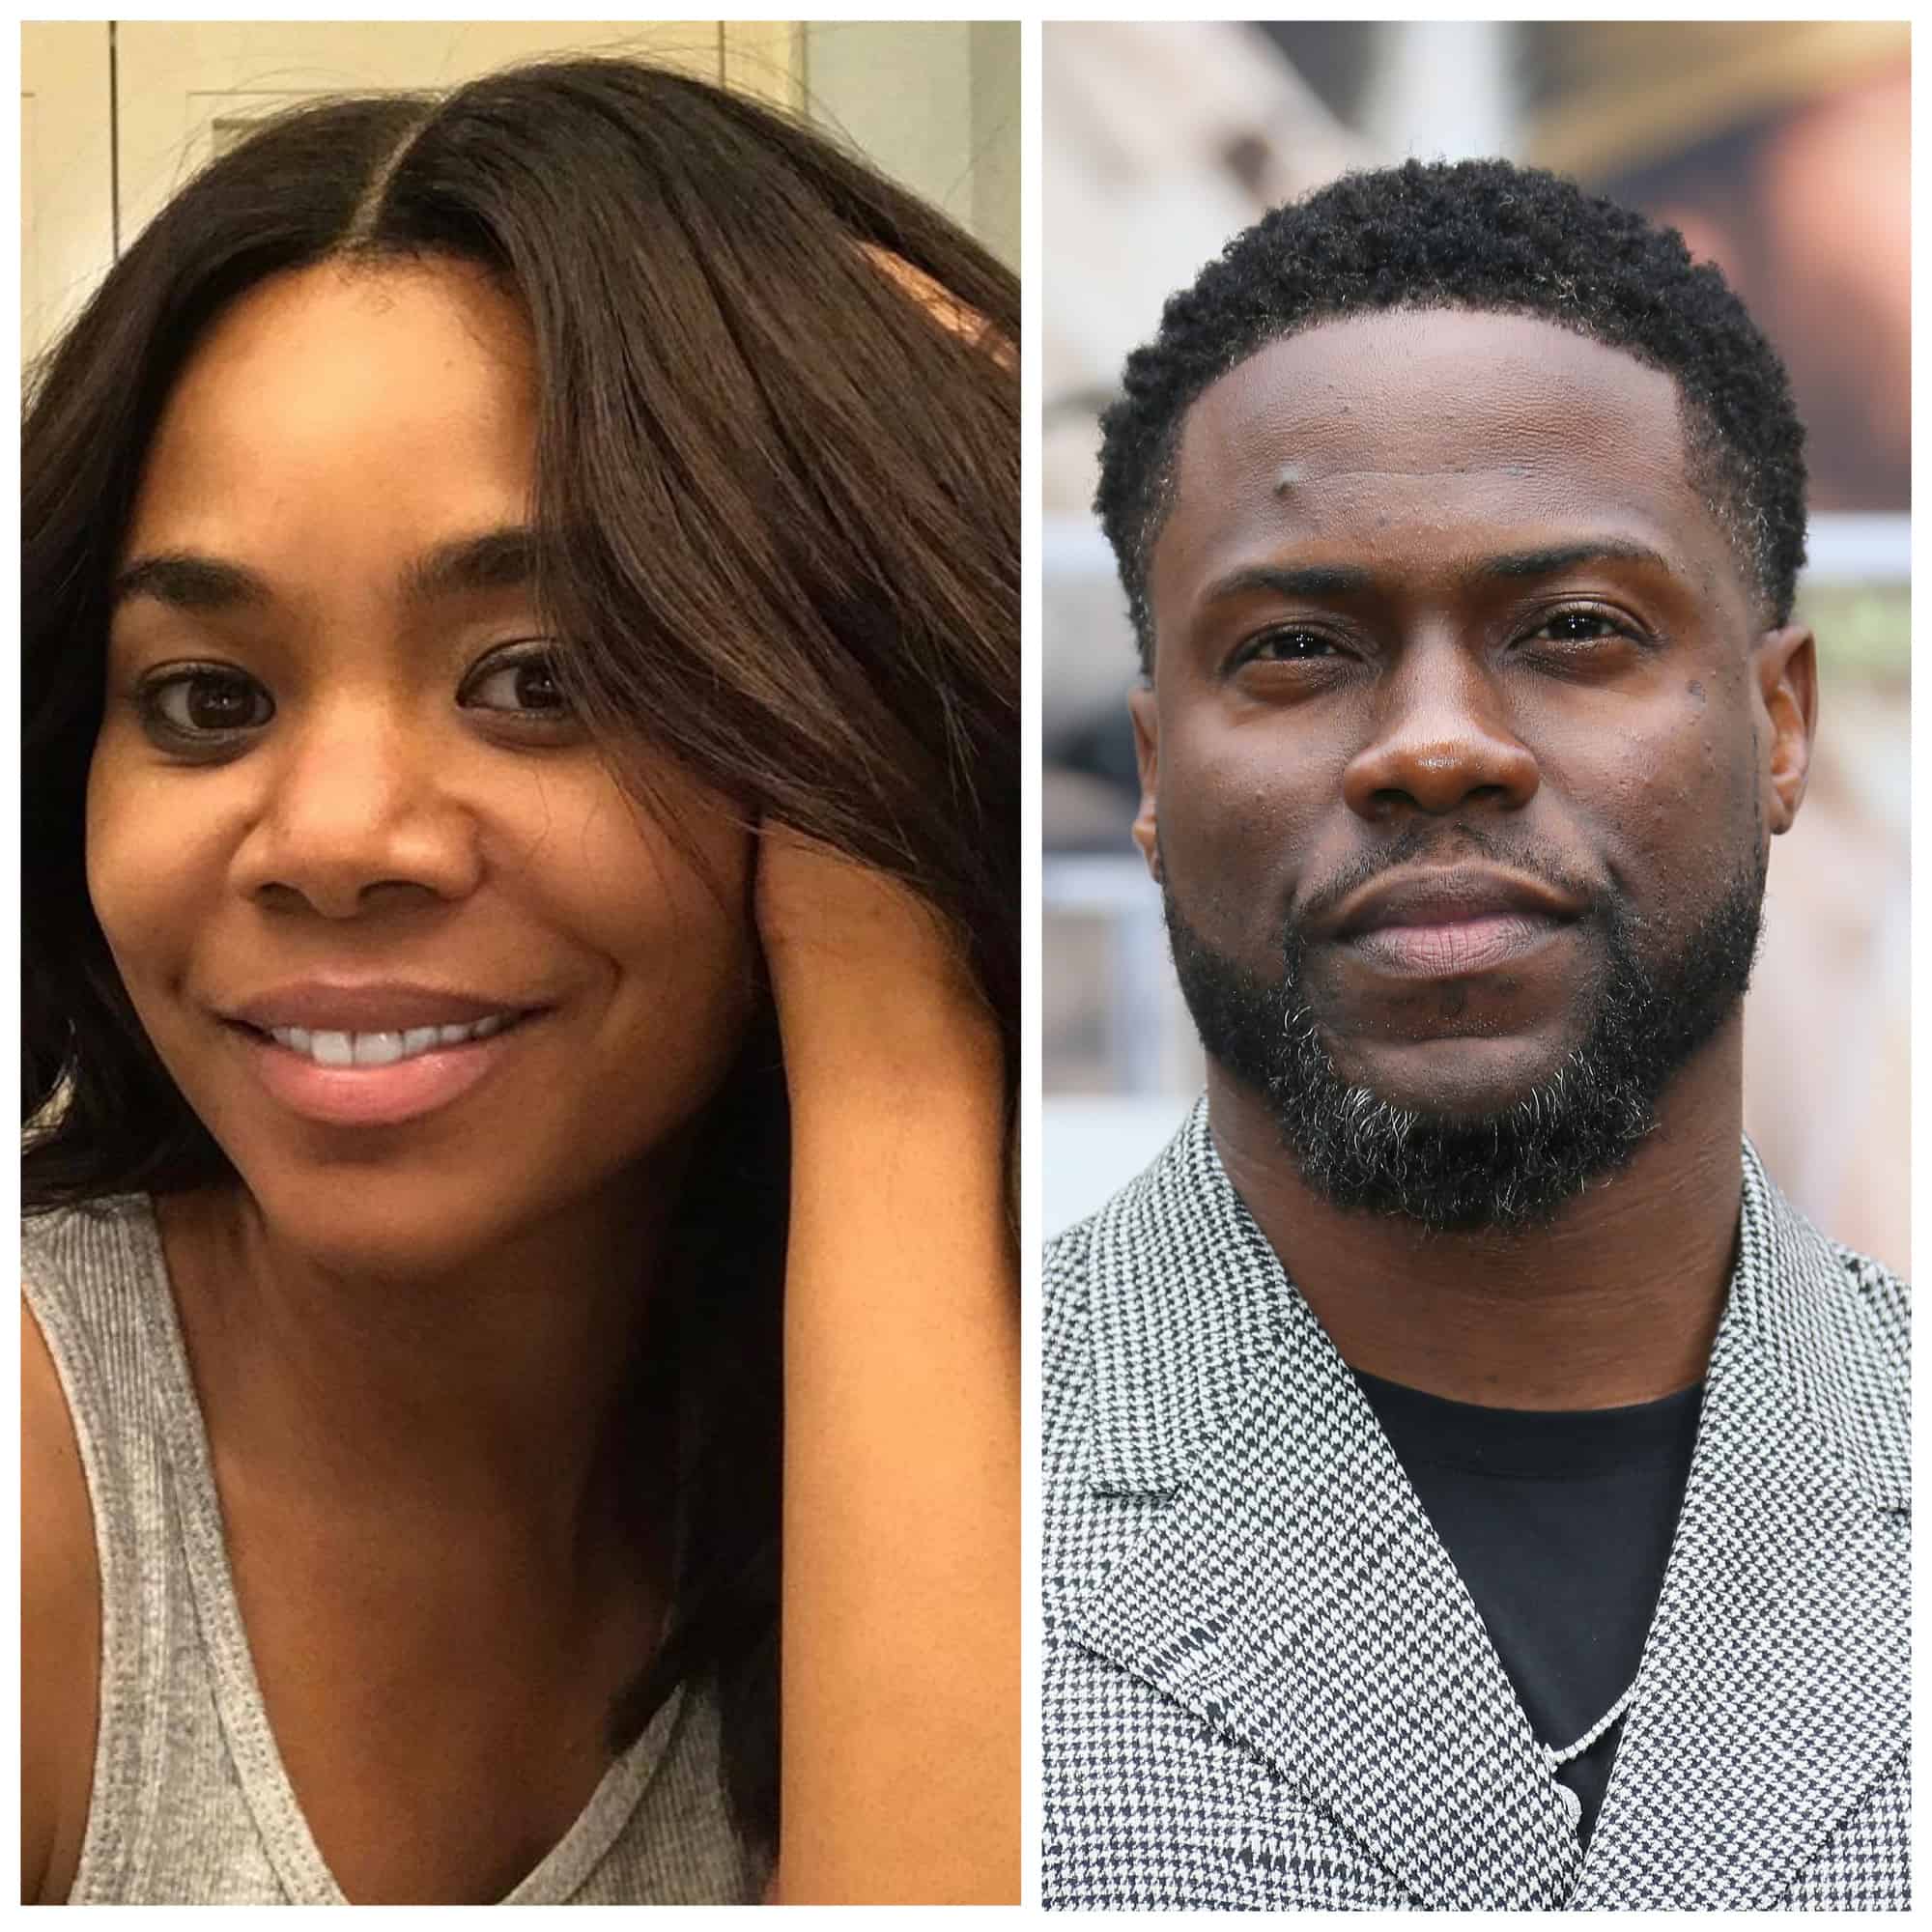 Regina Hall And Kevin Hart Give The Internet A Much-Needed Laugh In Hilario...